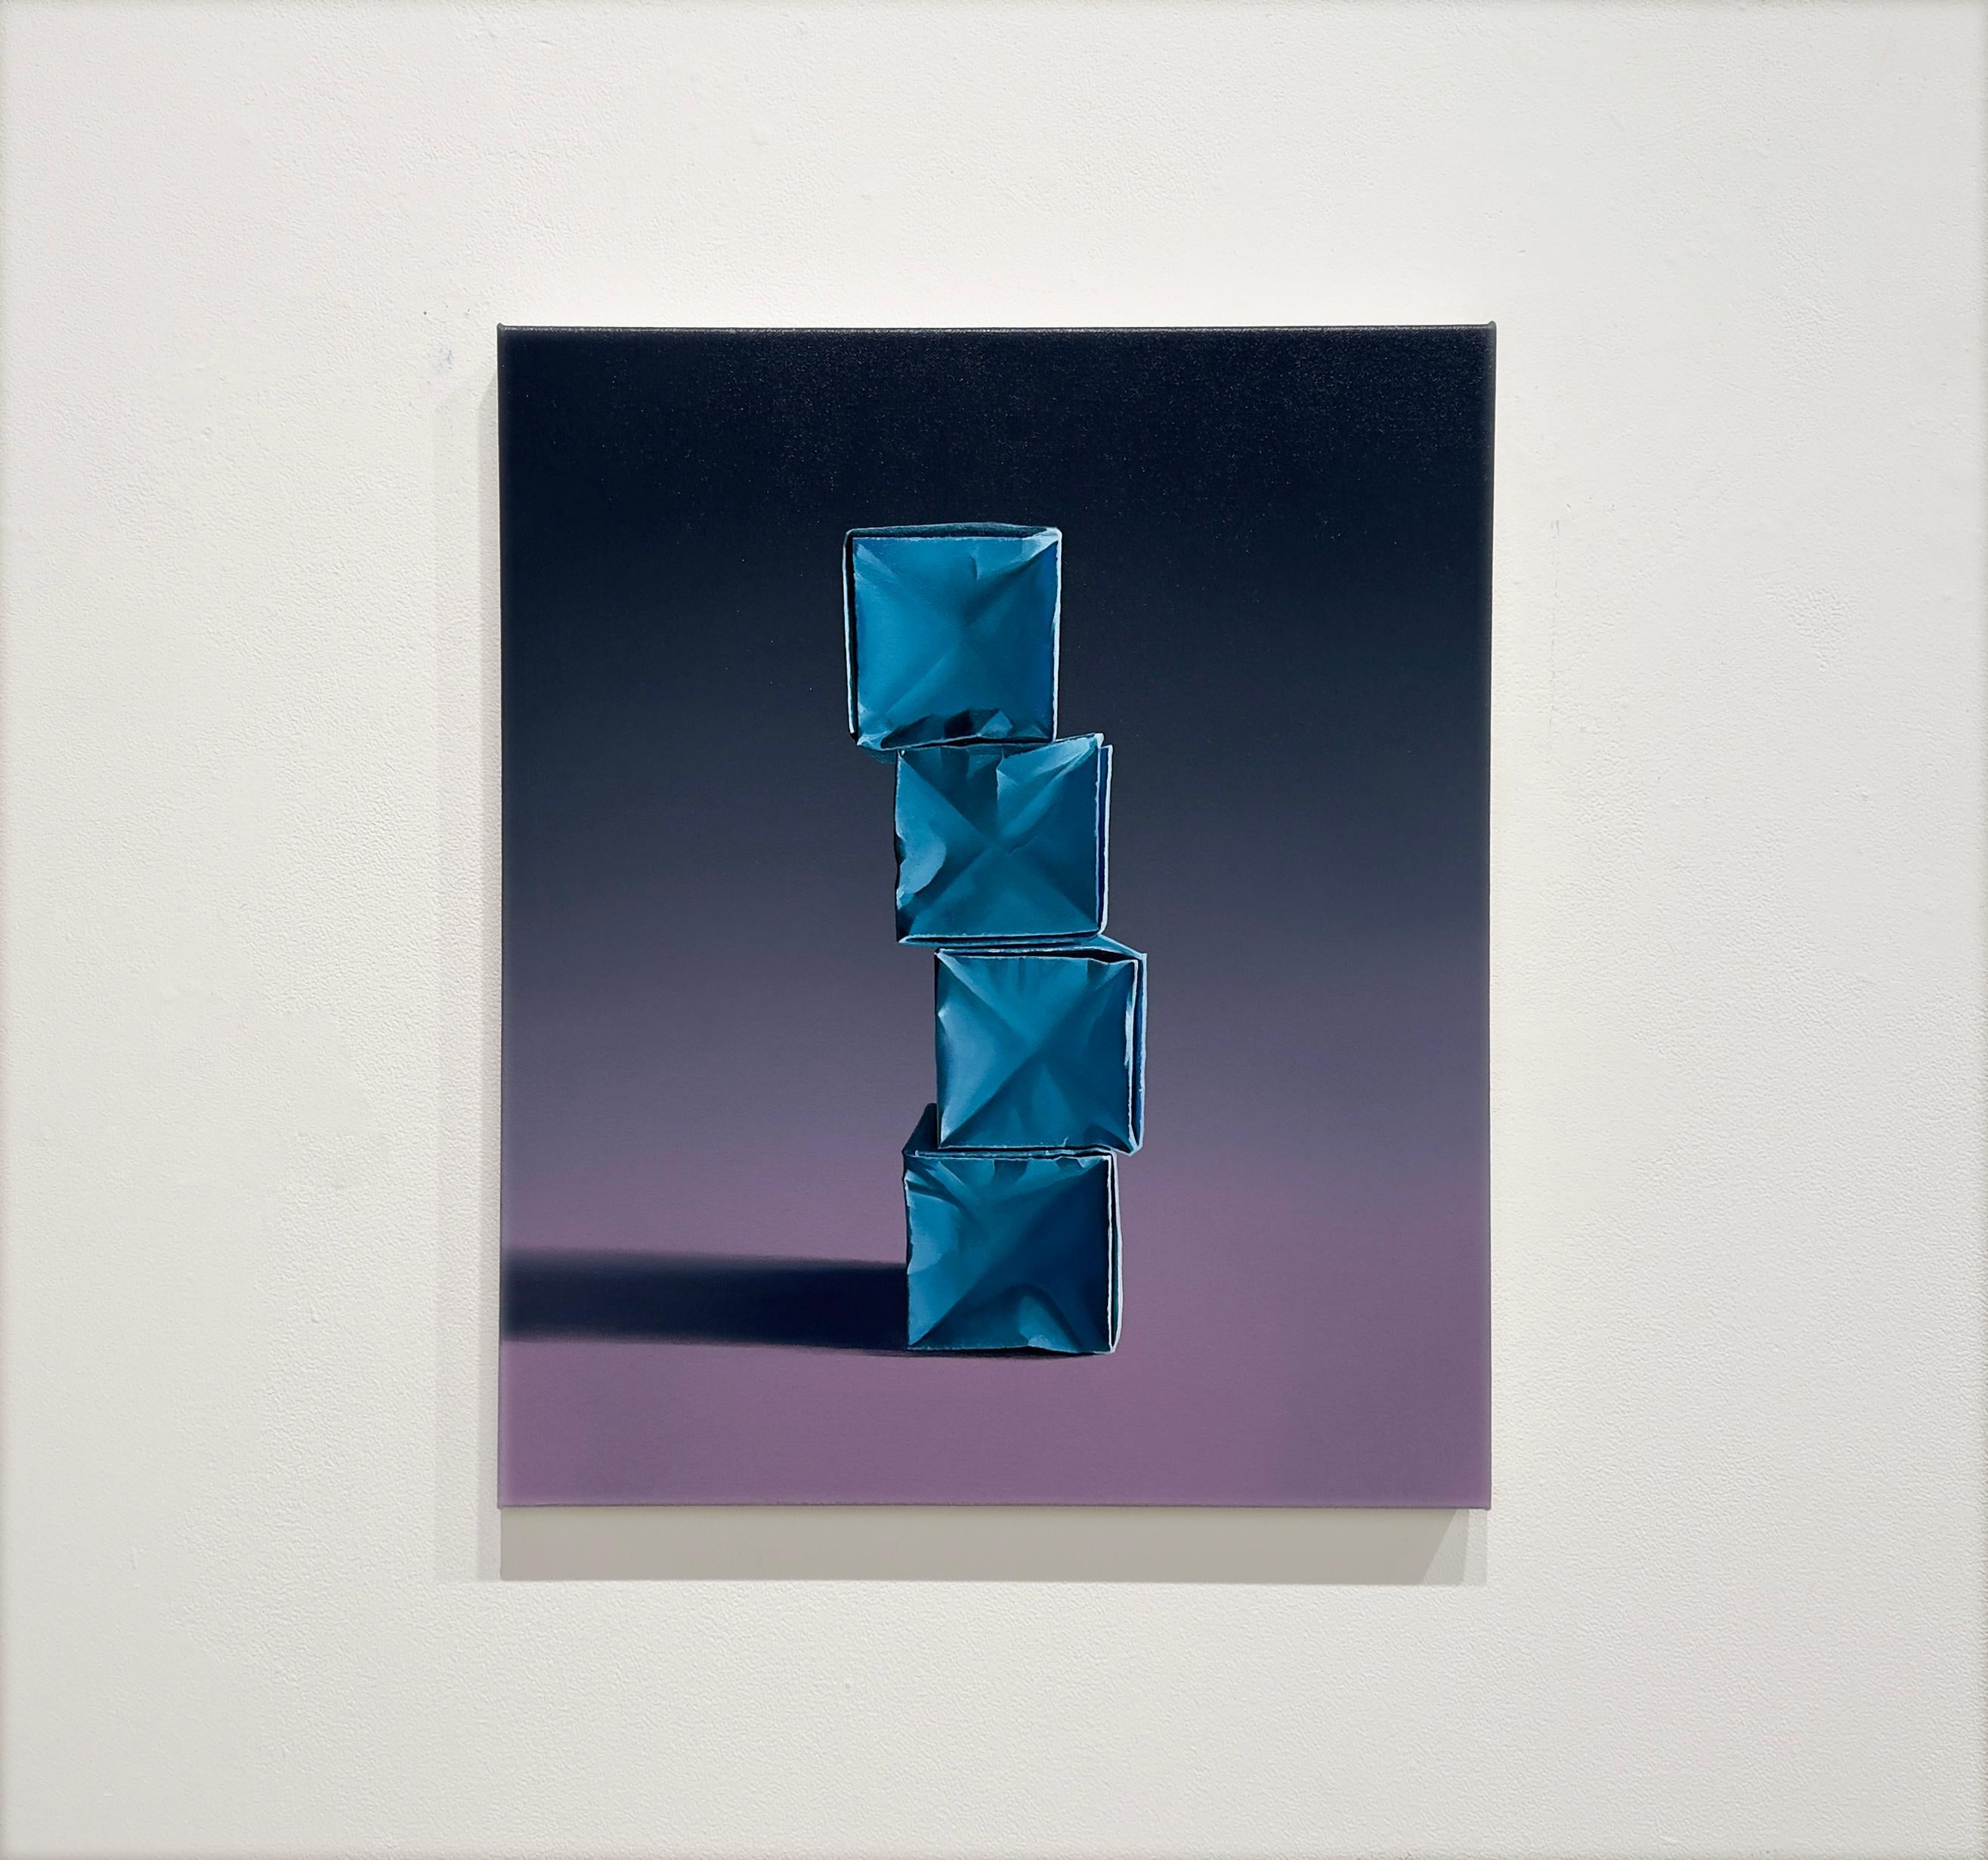 PAPER BOXES: COMPOSITION WITH A TEAL STACK ON PURPLE/GRAY GRADIENT - Painting by Kevin Palme 